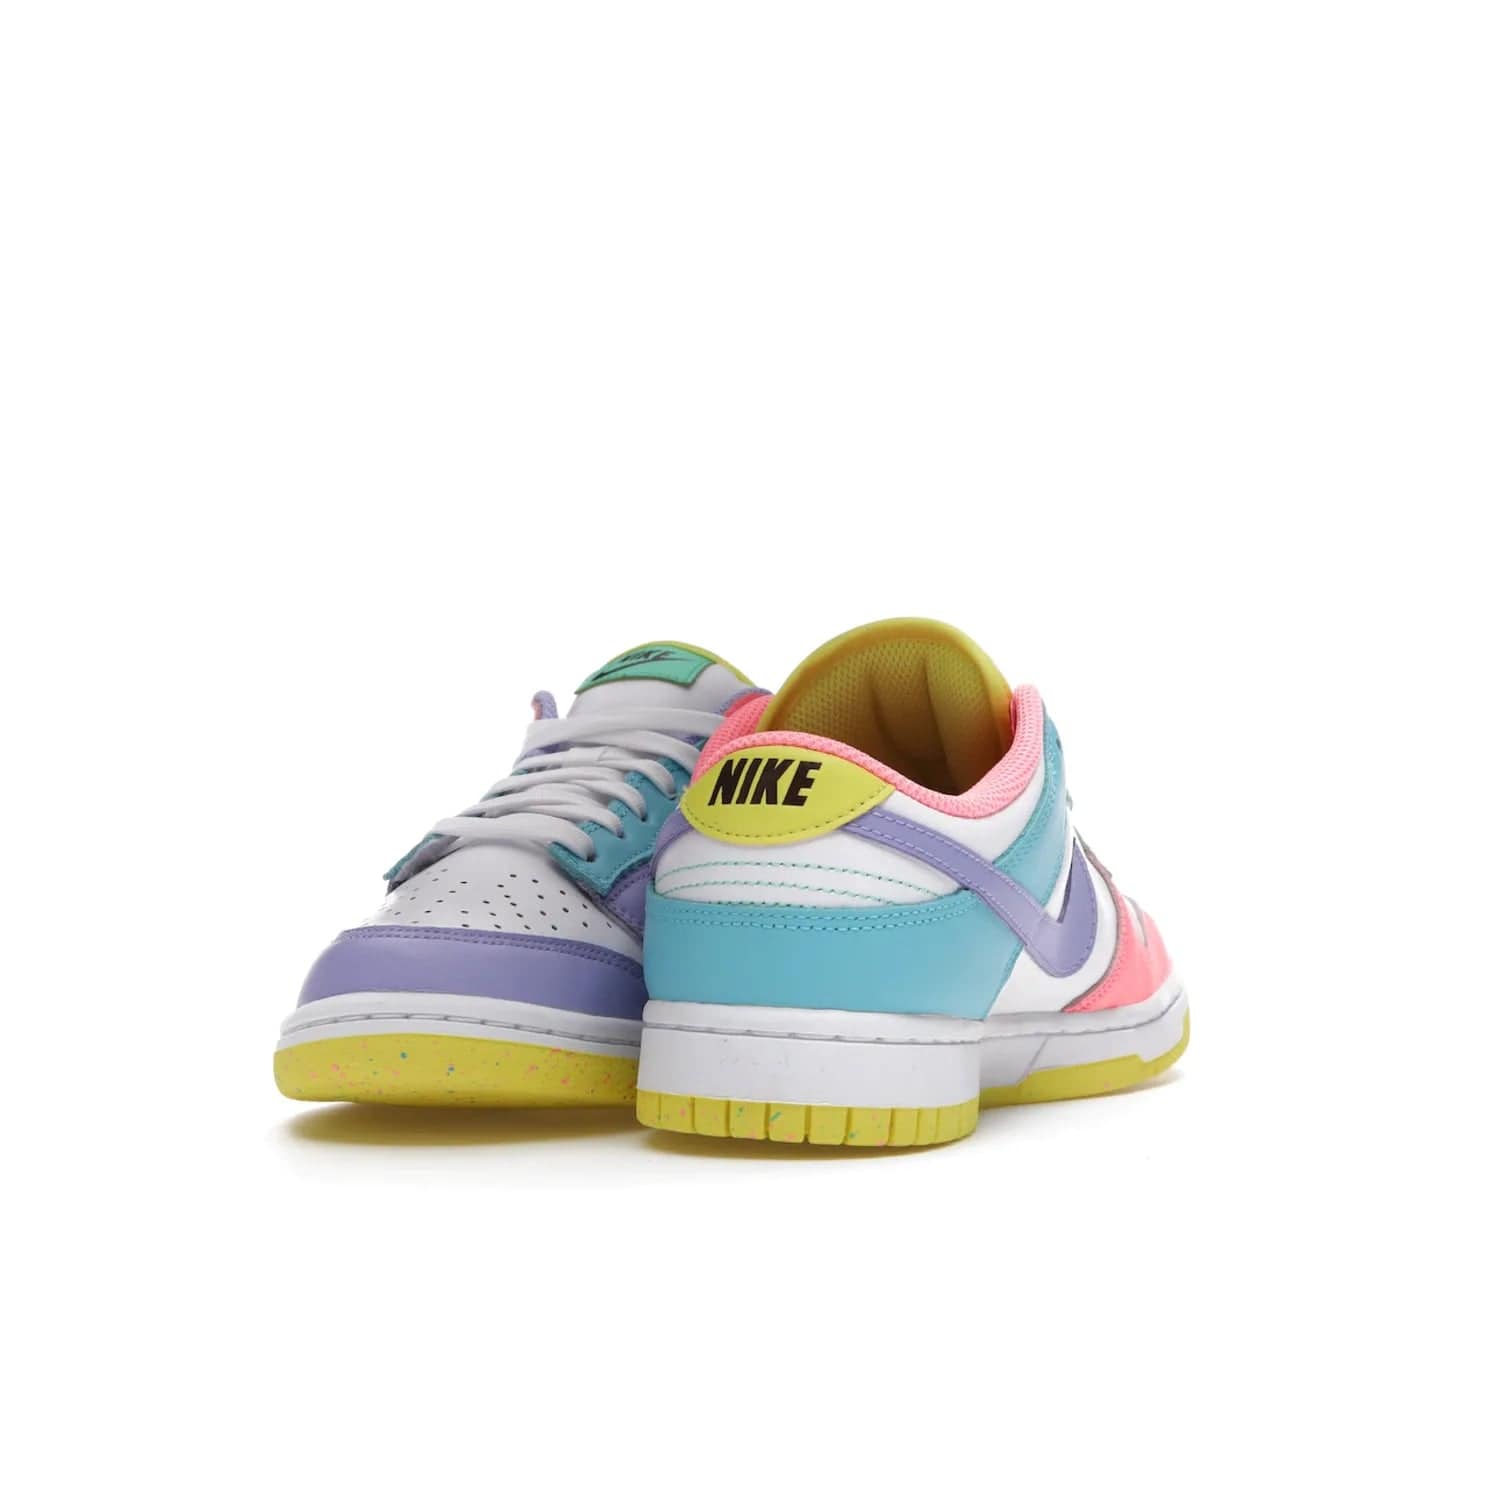 Nike Dunk Low SE Easter Candy (Women's) - Image 12 - Only at www.BallersClubKickz.com - UP
The Nike Dunk Low SE Easter Candy (Women's) brings a stylish touch to any outfit with its white leather upper, colorful accents, and multicolor speckle detailing. Shop now before they're gone.